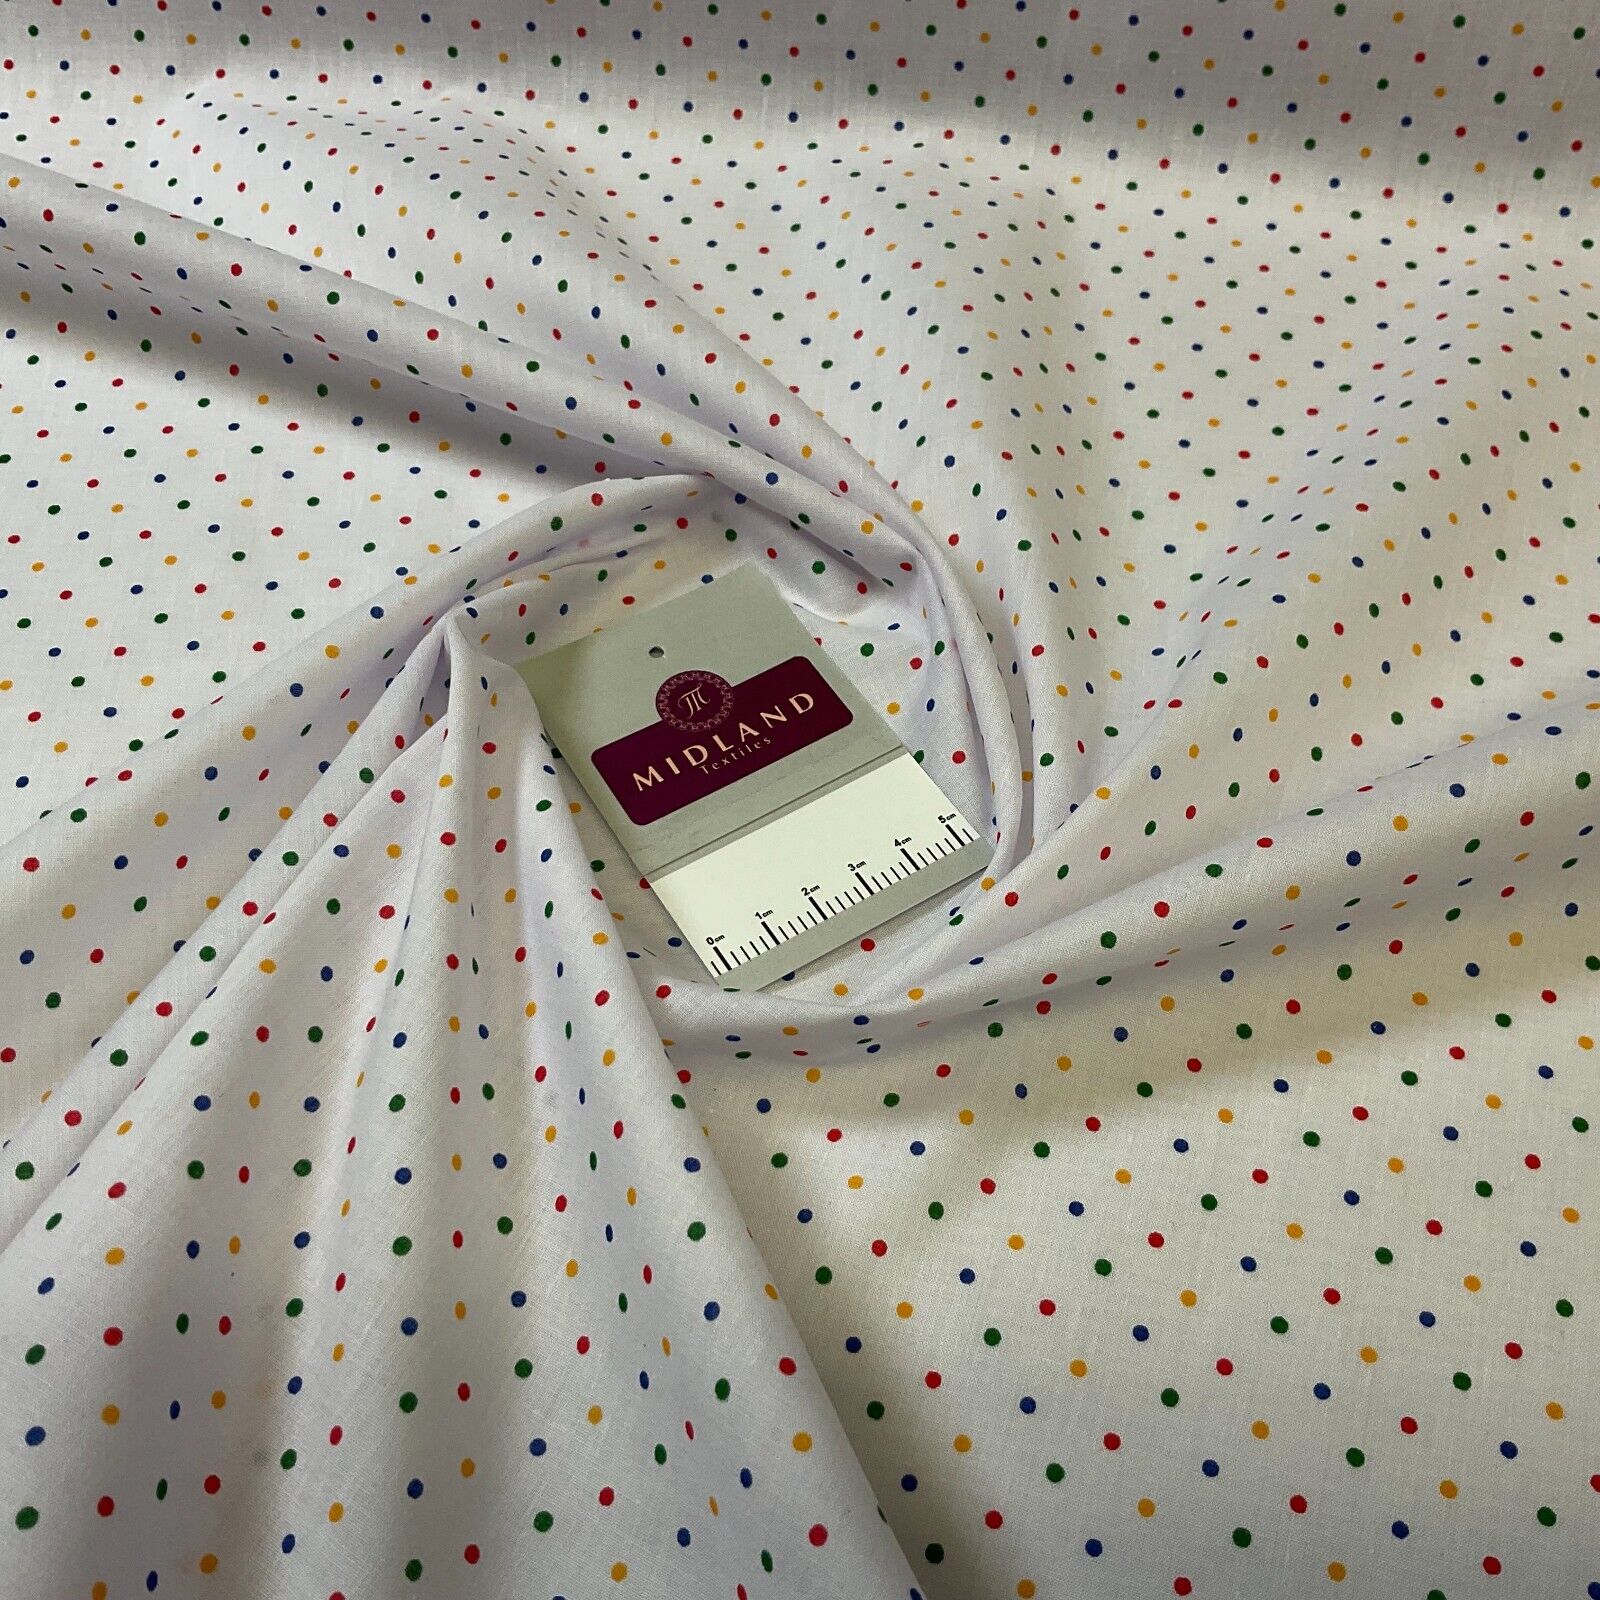 Multi coloured dot spot Poly cotton spotted dotted printed fabric M1709